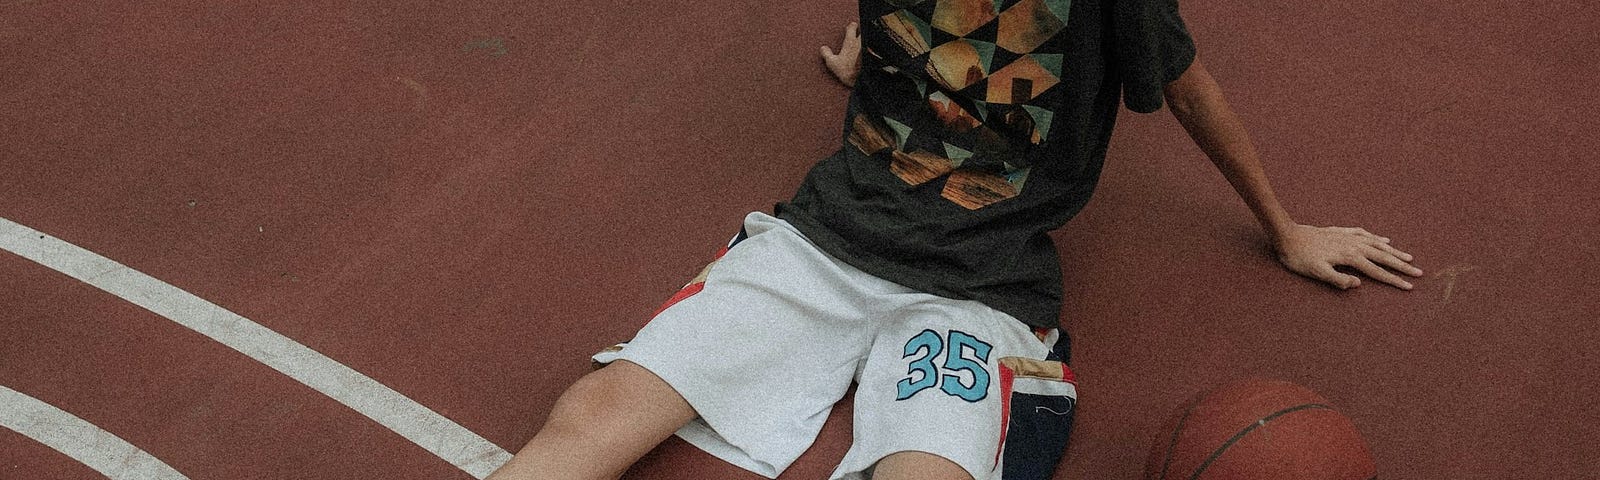 Kid sprawled out on a basketball court.